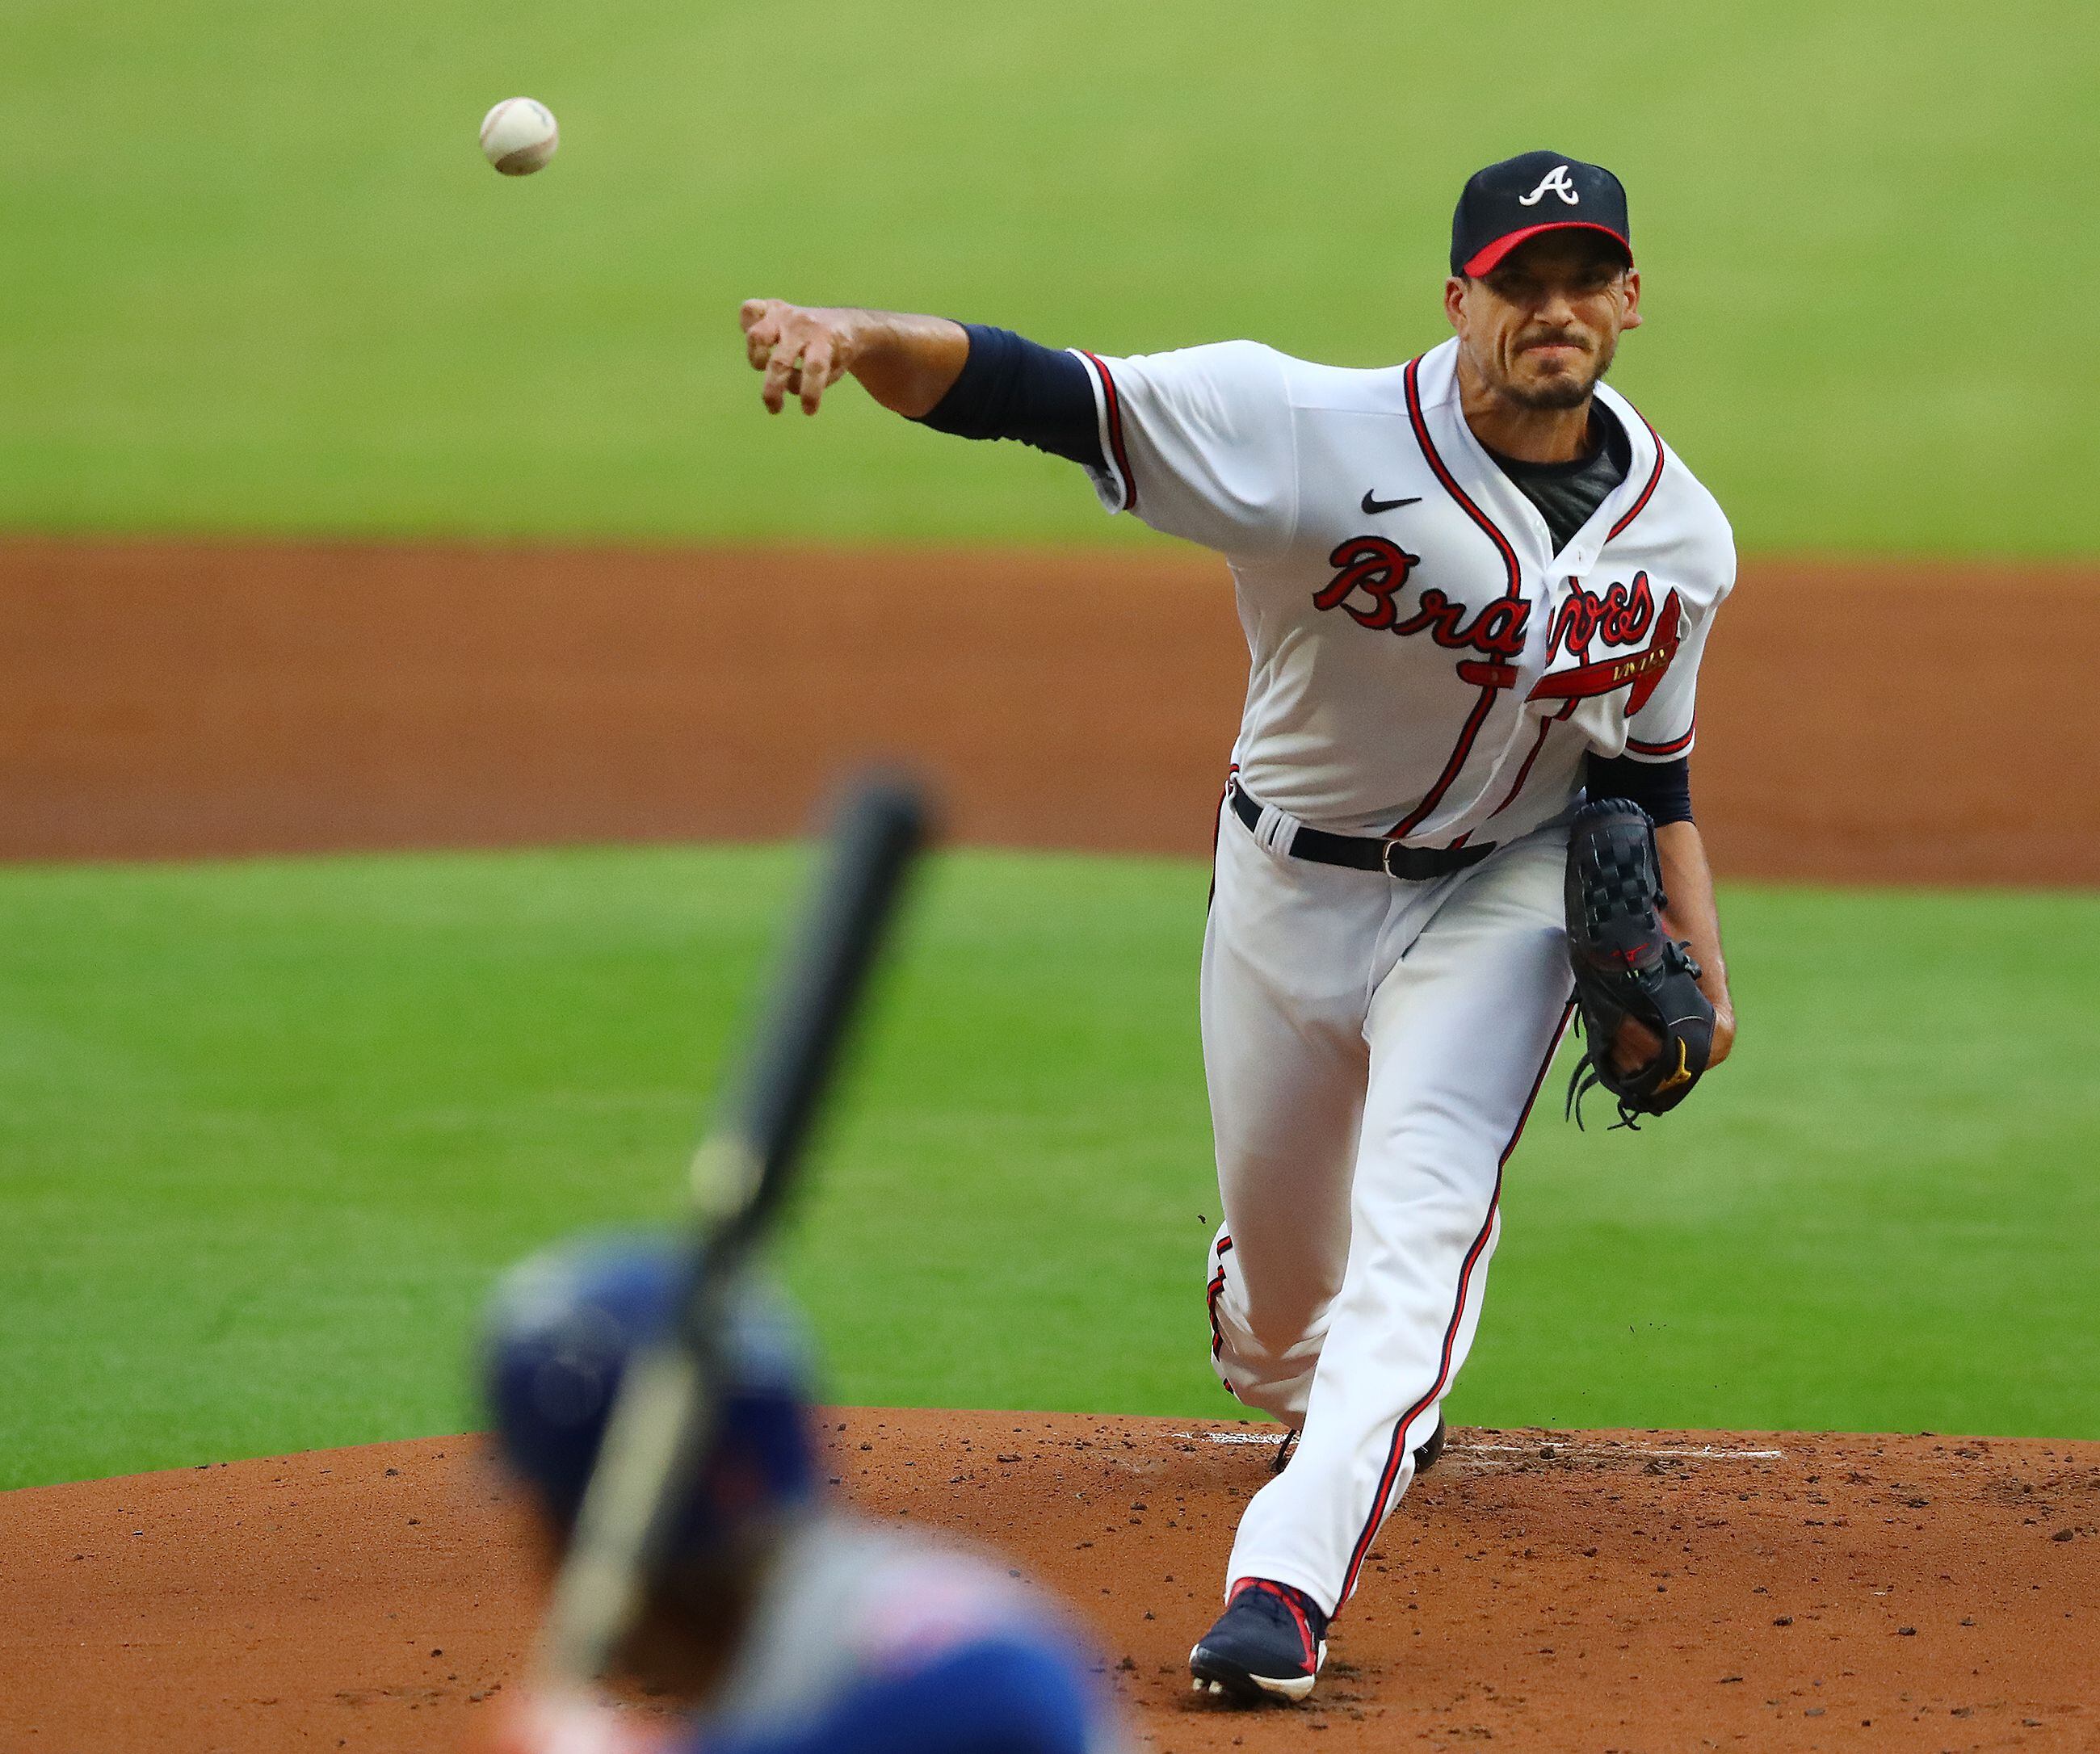 Braves Nation: The ageless Charlie Morton does it again